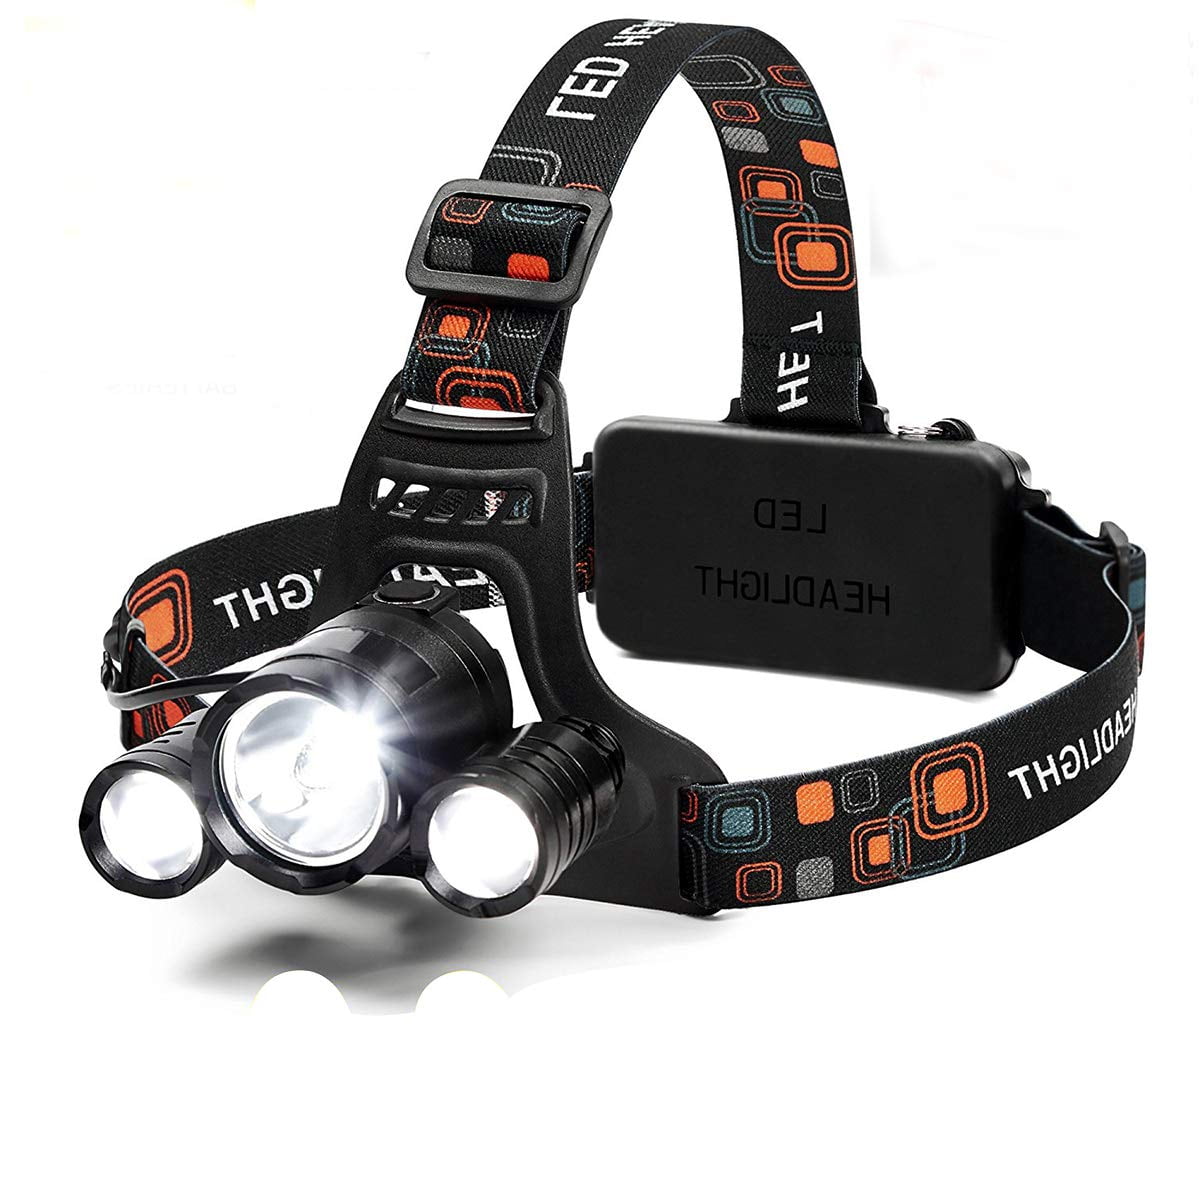 Observation Hunting Zoomable Headlamp USB Rechargeable 600 Lumens Motion Sensor Headlight with Batteries for Night Vision Camping LED Head Torch with Red Light